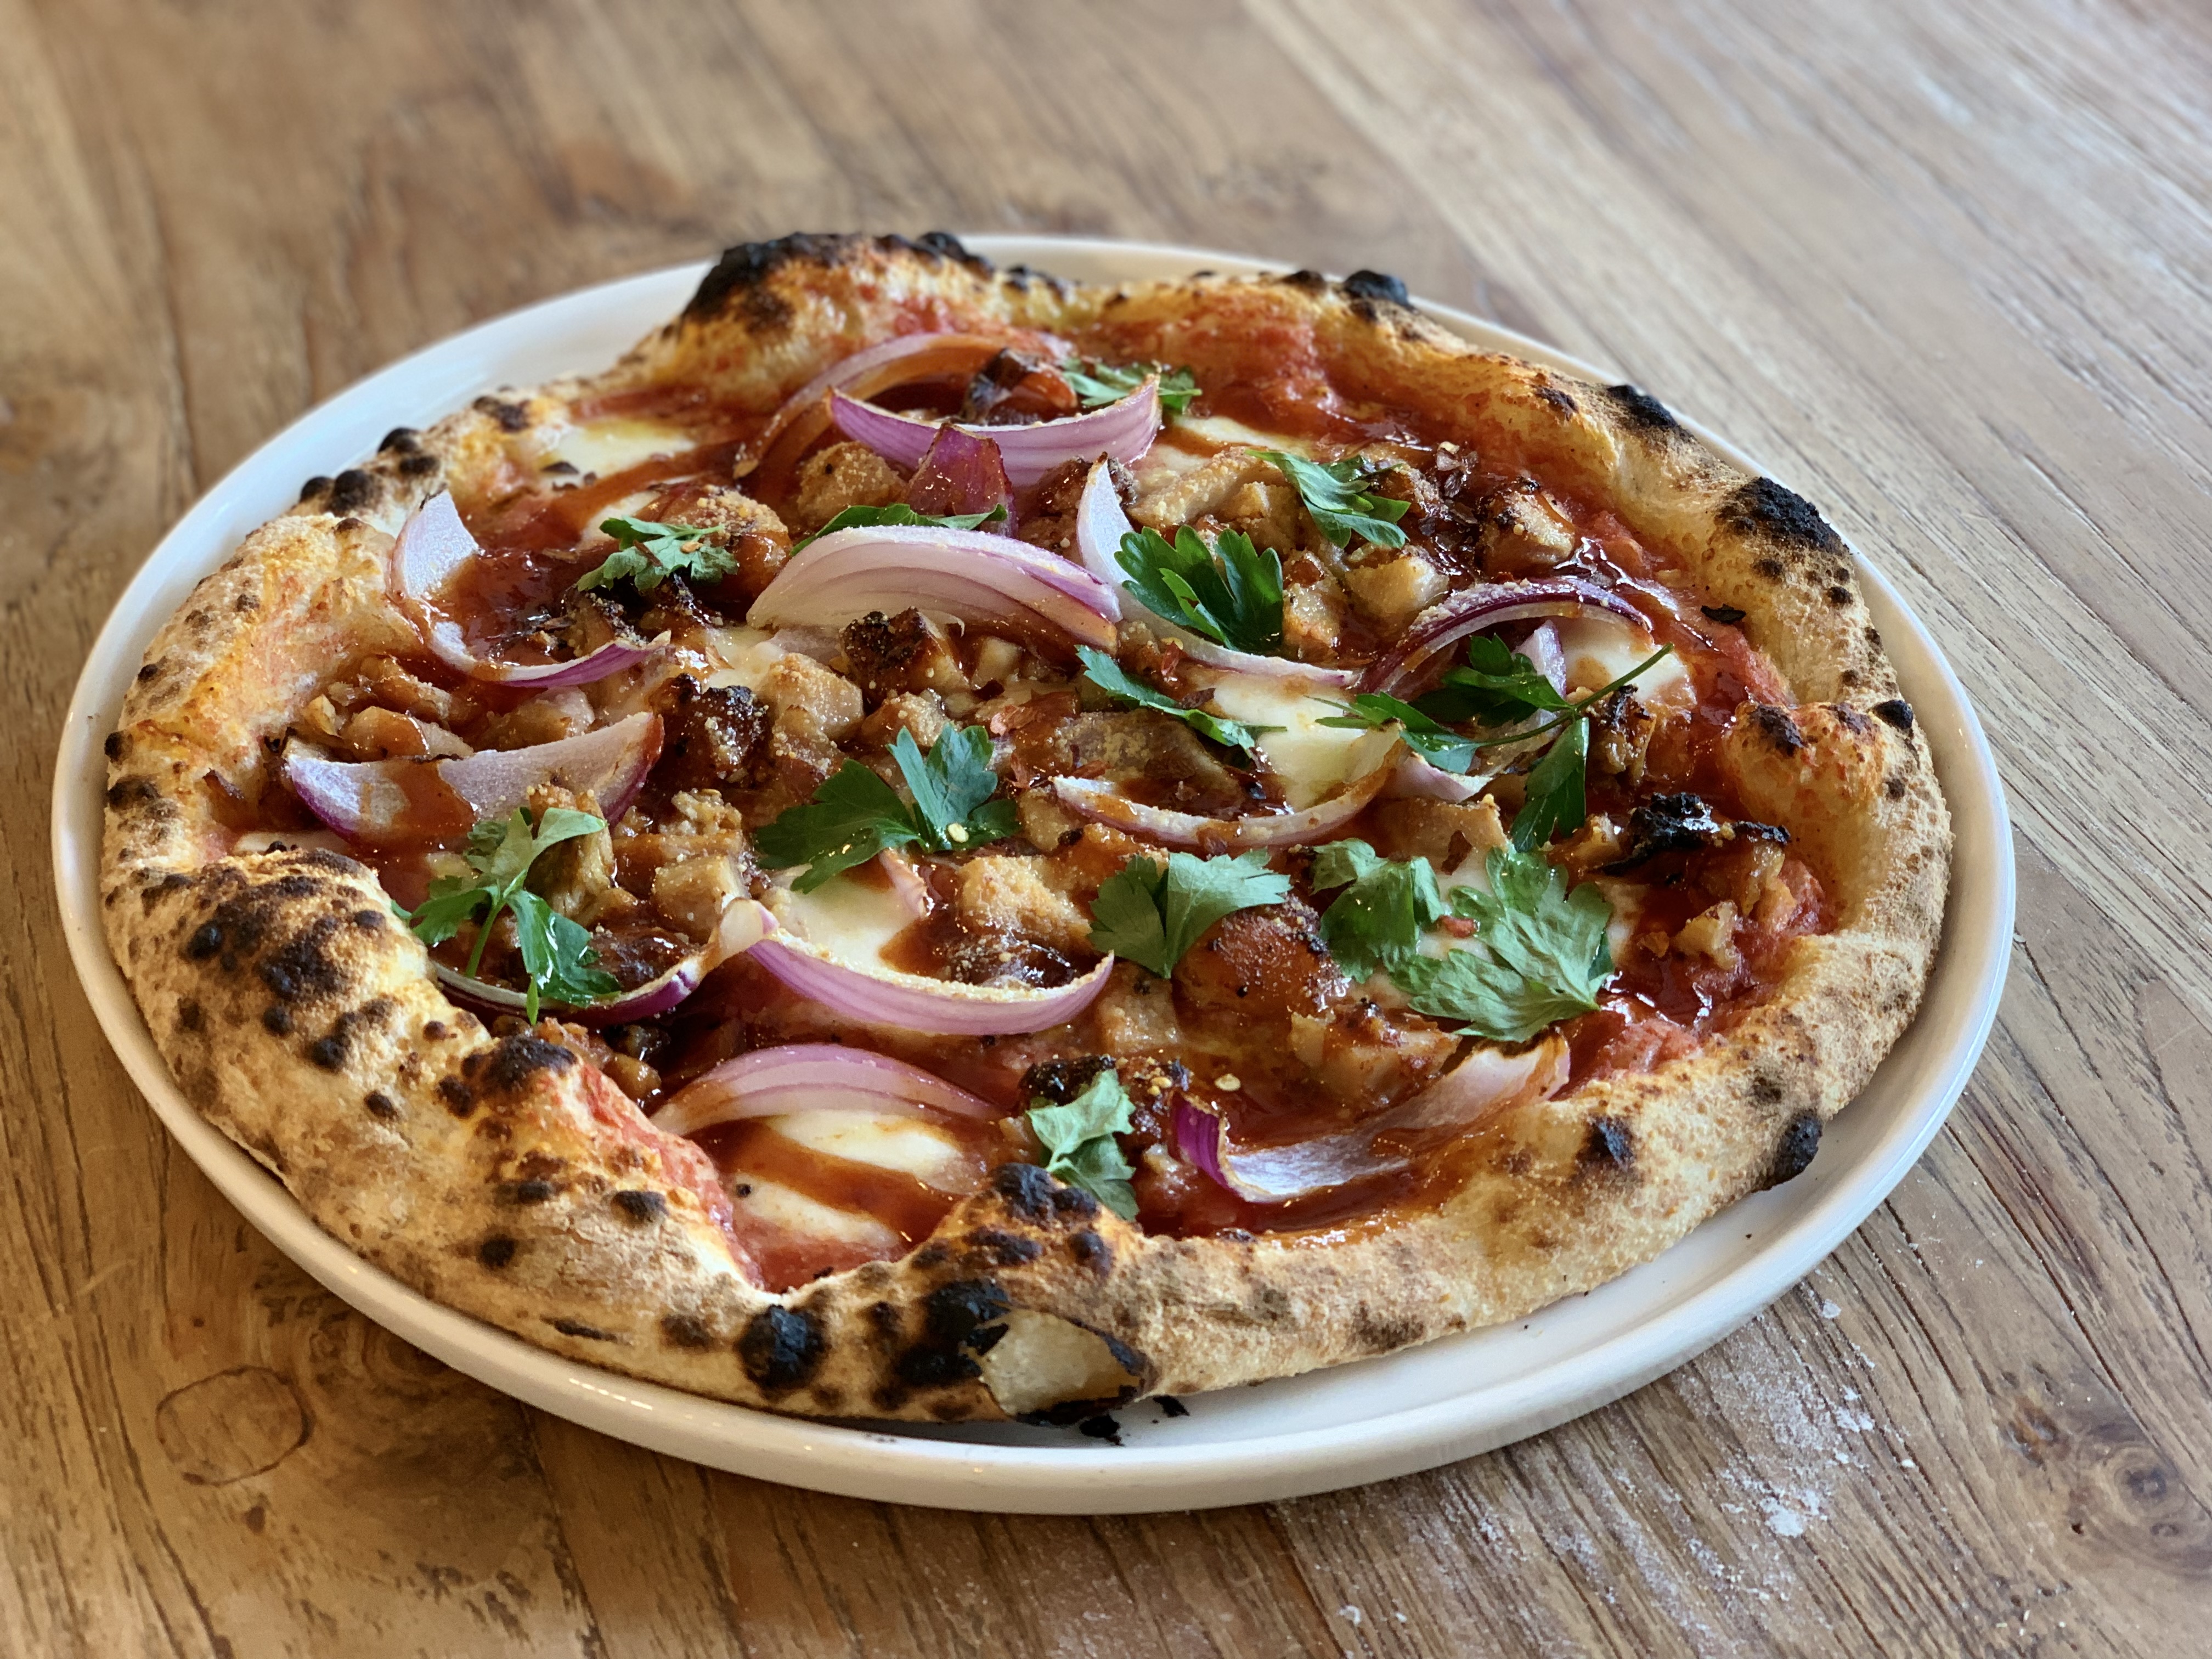 September's Special - Chicken Onion Pizza